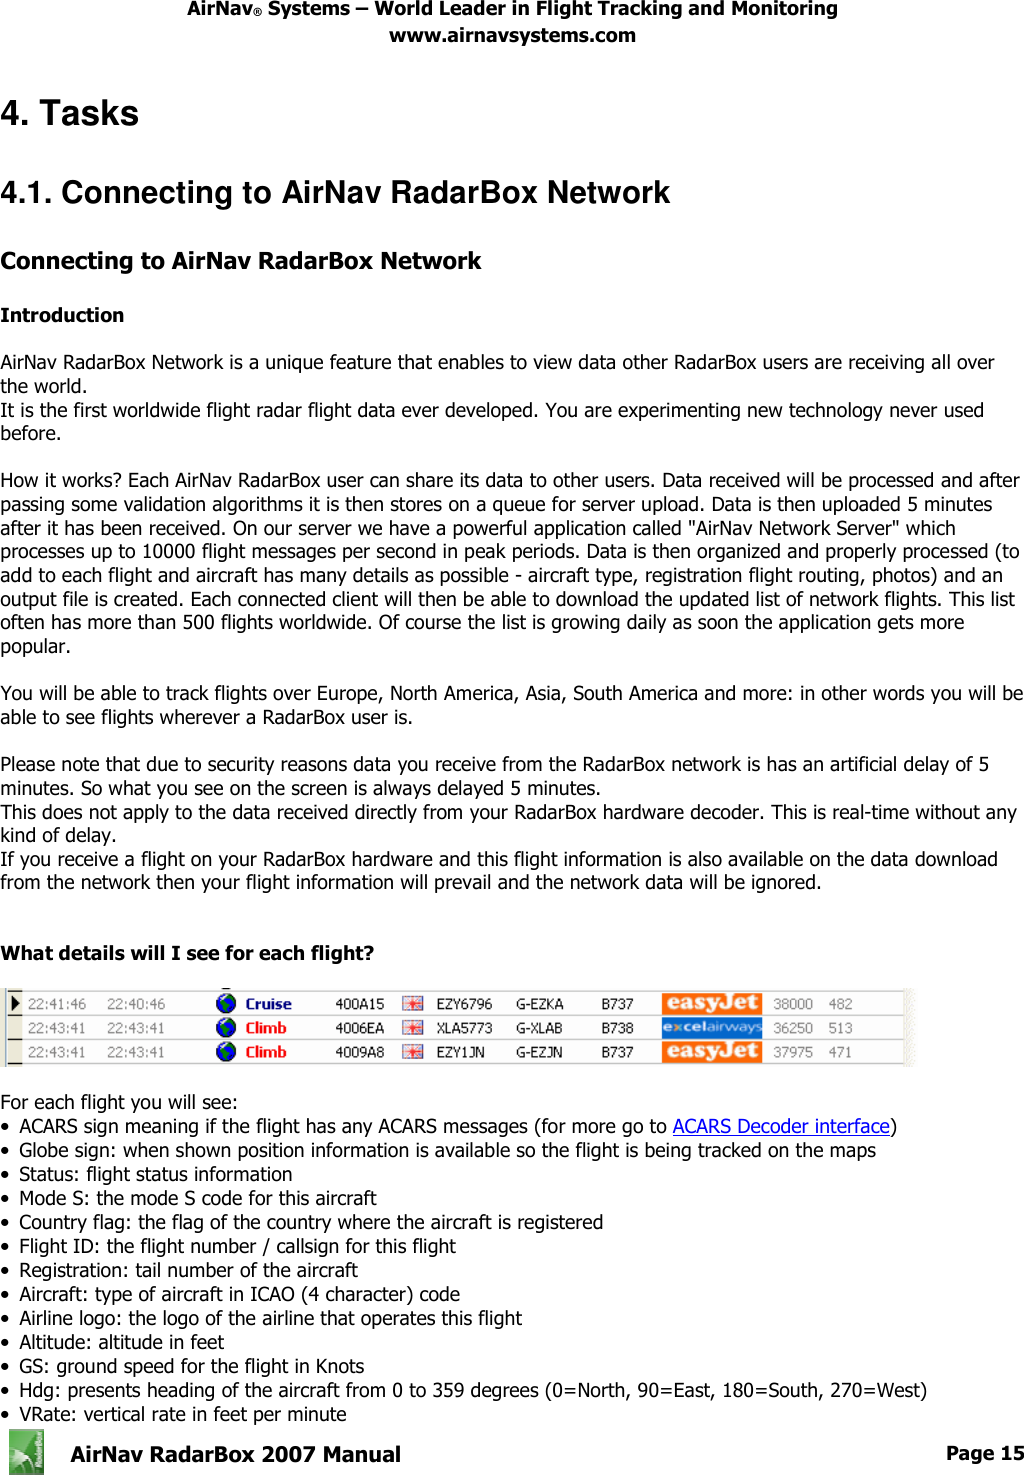 AirNav® Systems – World Leader in Flight Tracking and Monitoring www.airnavsystems.com   AirNav RadarBox 2007 Manual  Page 15       4. Tasks  4.1. Connecting to AirNav RadarBox Network  Connecting to AirNav RadarBox Network  Introduction  AirNav RadarBox Network is a unique feature that enables to view data other RadarBox users are receiving all over the world. It is the first worldwide flight radar flight data ever developed. You are experimenting new technology never used before.  How it works? Each AirNav RadarBox user can share its data to other users. Data received will be processed and after passing some validation algorithms it is then stores on a queue for server upload. Data is then uploaded 5 minutes after it has been received. On our server we have a powerful application called &quot;AirNav Network Server&quot; which processes up to 10000 flight messages per second in peak periods. Data is then organized and properly processed (to add to each flight and aircraft has many details as possible - aircraft type, registration flight routing, photos) and an output file is created. Each connected client will then be able to download the updated list of network flights. This list often has more than 500 flights worldwide. Of course the list is growing daily as soon the application gets more popular.  You will be able to track flights over Europe, North America, Asia, South America and more: in other words you will be able to see flights wherever a RadarBox user is.  Please note that due to security reasons data you receive from the RadarBox network is has an artificial delay of 5 minutes. So what you see on the screen is always delayed 5 minutes. This does not apply to the data received directly from your RadarBox hardware decoder. This is real-time without any kind of delay. If you receive a flight on your RadarBox hardware and this flight information is also available on the data download from the network then your flight information will prevail and the network data will be ignored.   What details will I see for each flight?    For each flight you will see: •  ACARS sign meaning if the flight has any ACARS messages (for more go to ACARS Decoder interface) •  Globe sign: when shown position information is available so the flight is being tracked on the maps •  Status: flight status information •  Mode S: the mode S code for this aircraft •  Country flag: the flag of the country where the aircraft is registered •  Flight ID: the flight number / callsign for this flight •  Registration: tail number of the aircraft •  Aircraft: type of aircraft in ICAO (4 character) code •  Airline logo: the logo of the airline that operates this flight •  Altitude: altitude in feet •  GS: ground speed for the flight in Knots •  Hdg: presents heading of the aircraft from 0 to 359 degrees (0=North, 90=East, 180=South, 270=West) •  VRate: vertical rate in feet per minute 